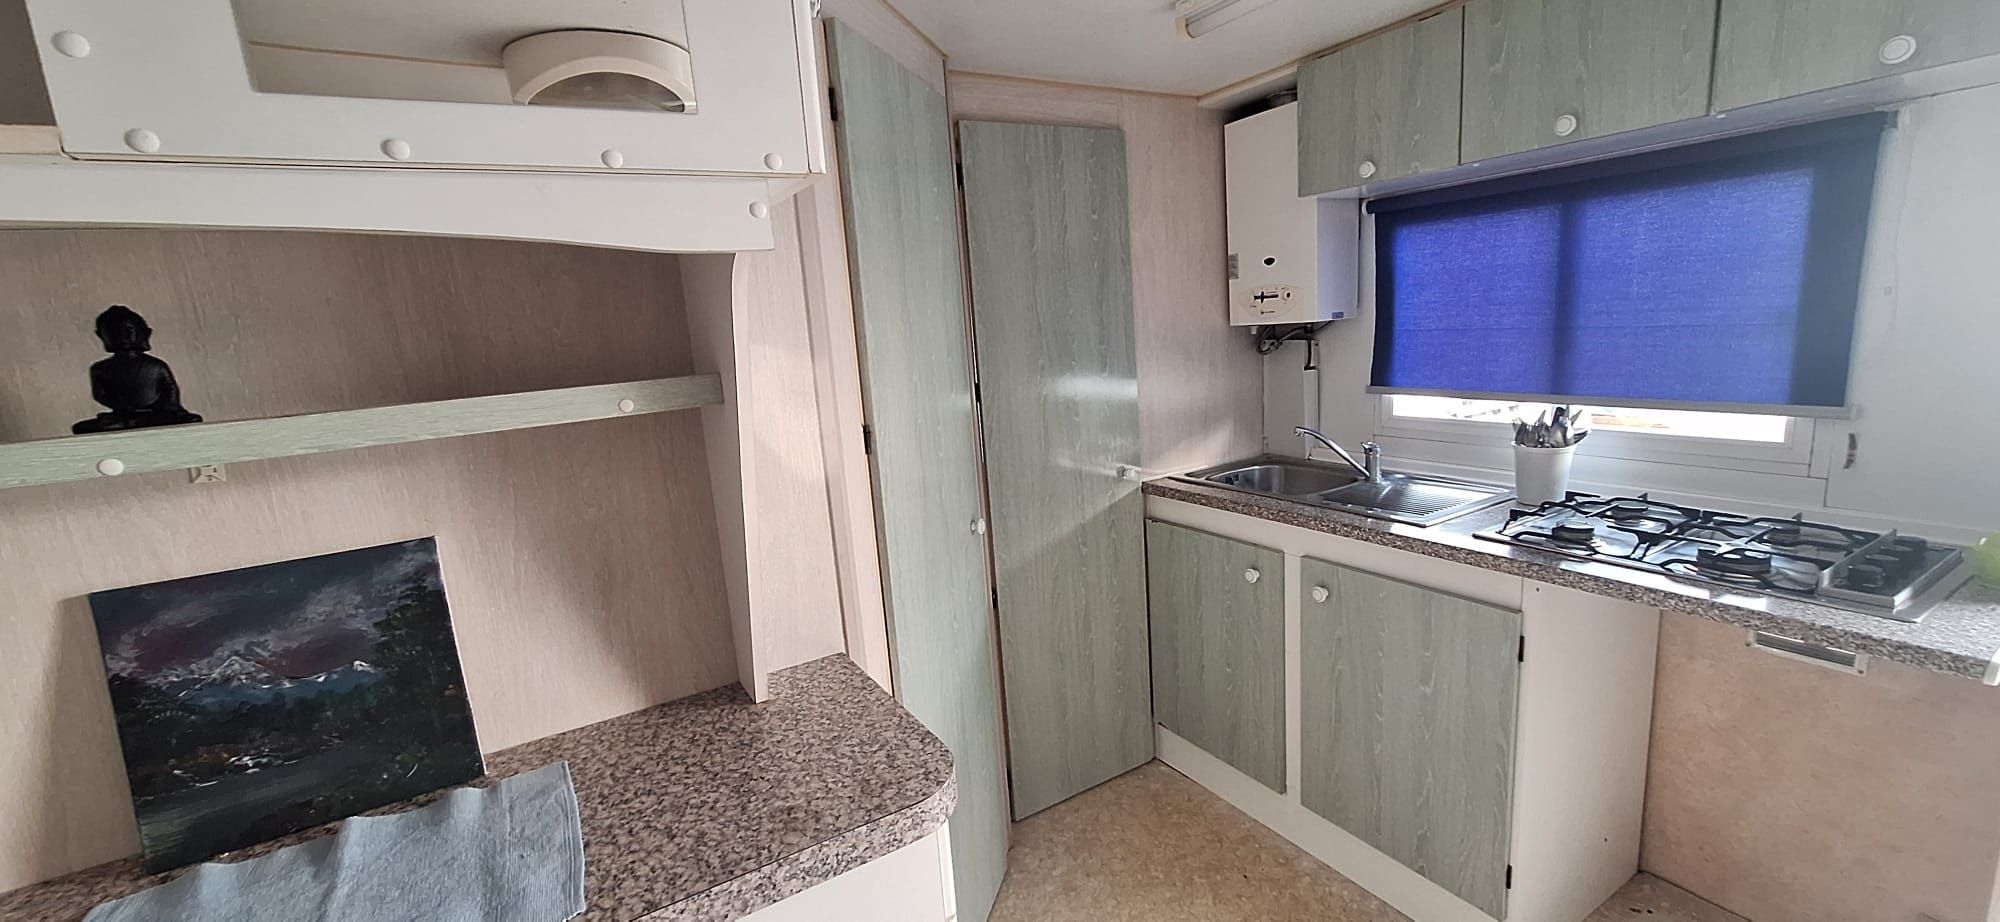 Mobil home tipo T2